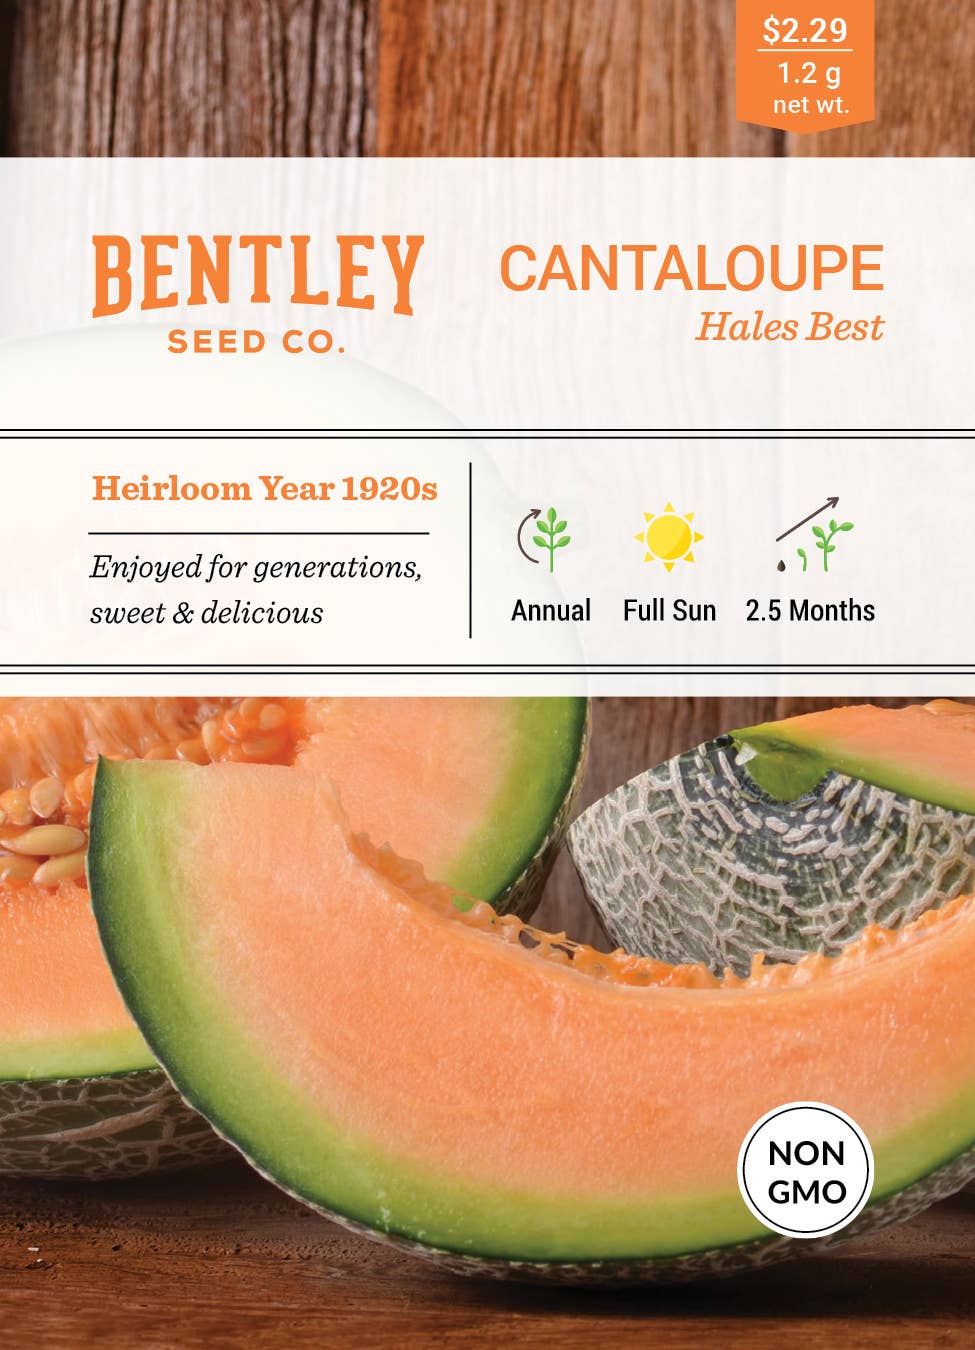  Official Bentley Seed Products